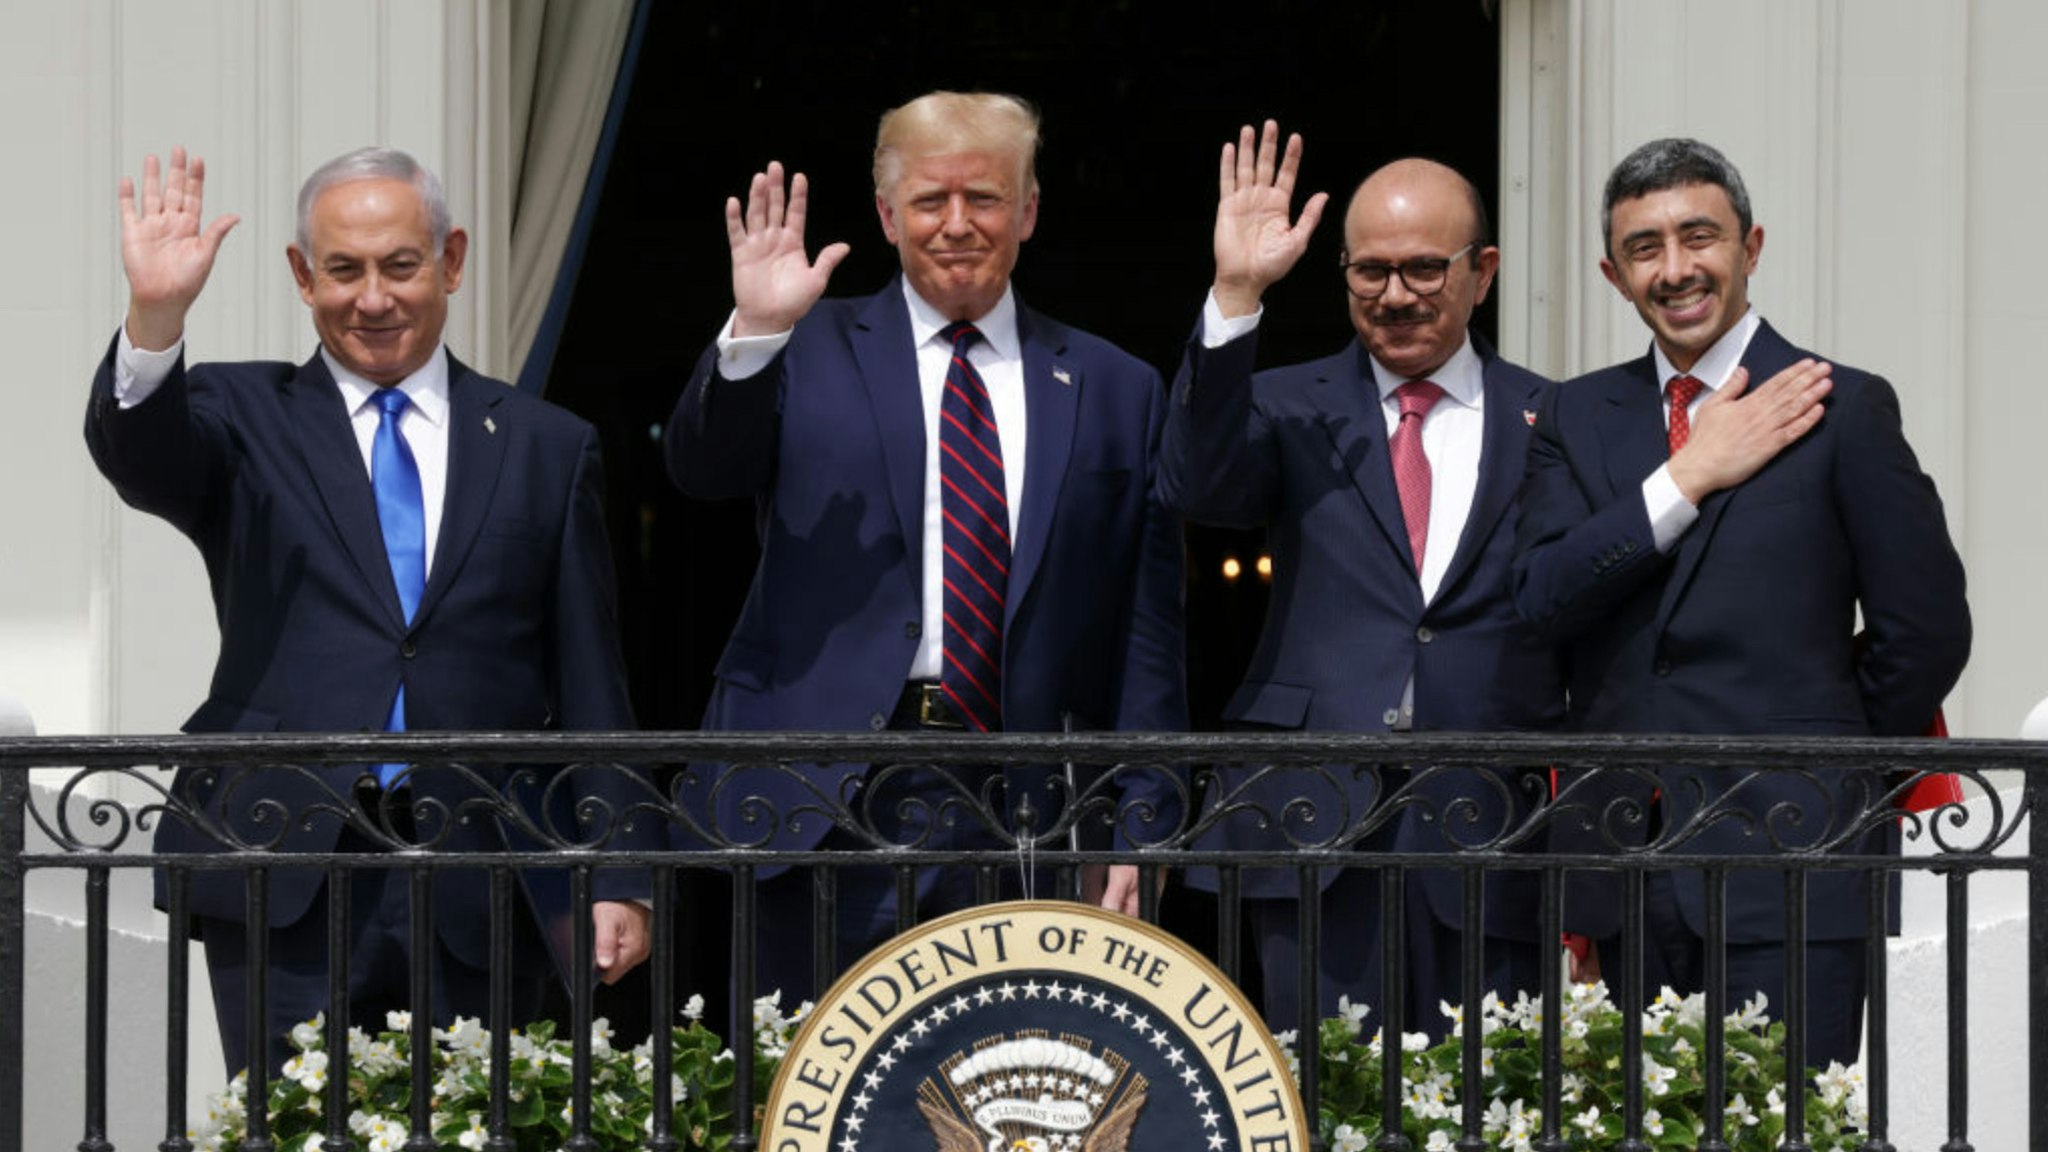 Prime Minister of Israel Benjamin Netanyahu, U.S. President Donald Trump, Foreign Affairs Minister of Bahrain Abdullatif bin Rashid Al Zayani, and Foreign Affairs Minister of the United Arab Emirates Abdullah bin Zayed bin Sultan Al Nahyan wave from the Truman Balcony of the White House after the signing ceremony of the Abraham Accords on the South Lawn of the White House on September 15, 2020 in Washington, DC.